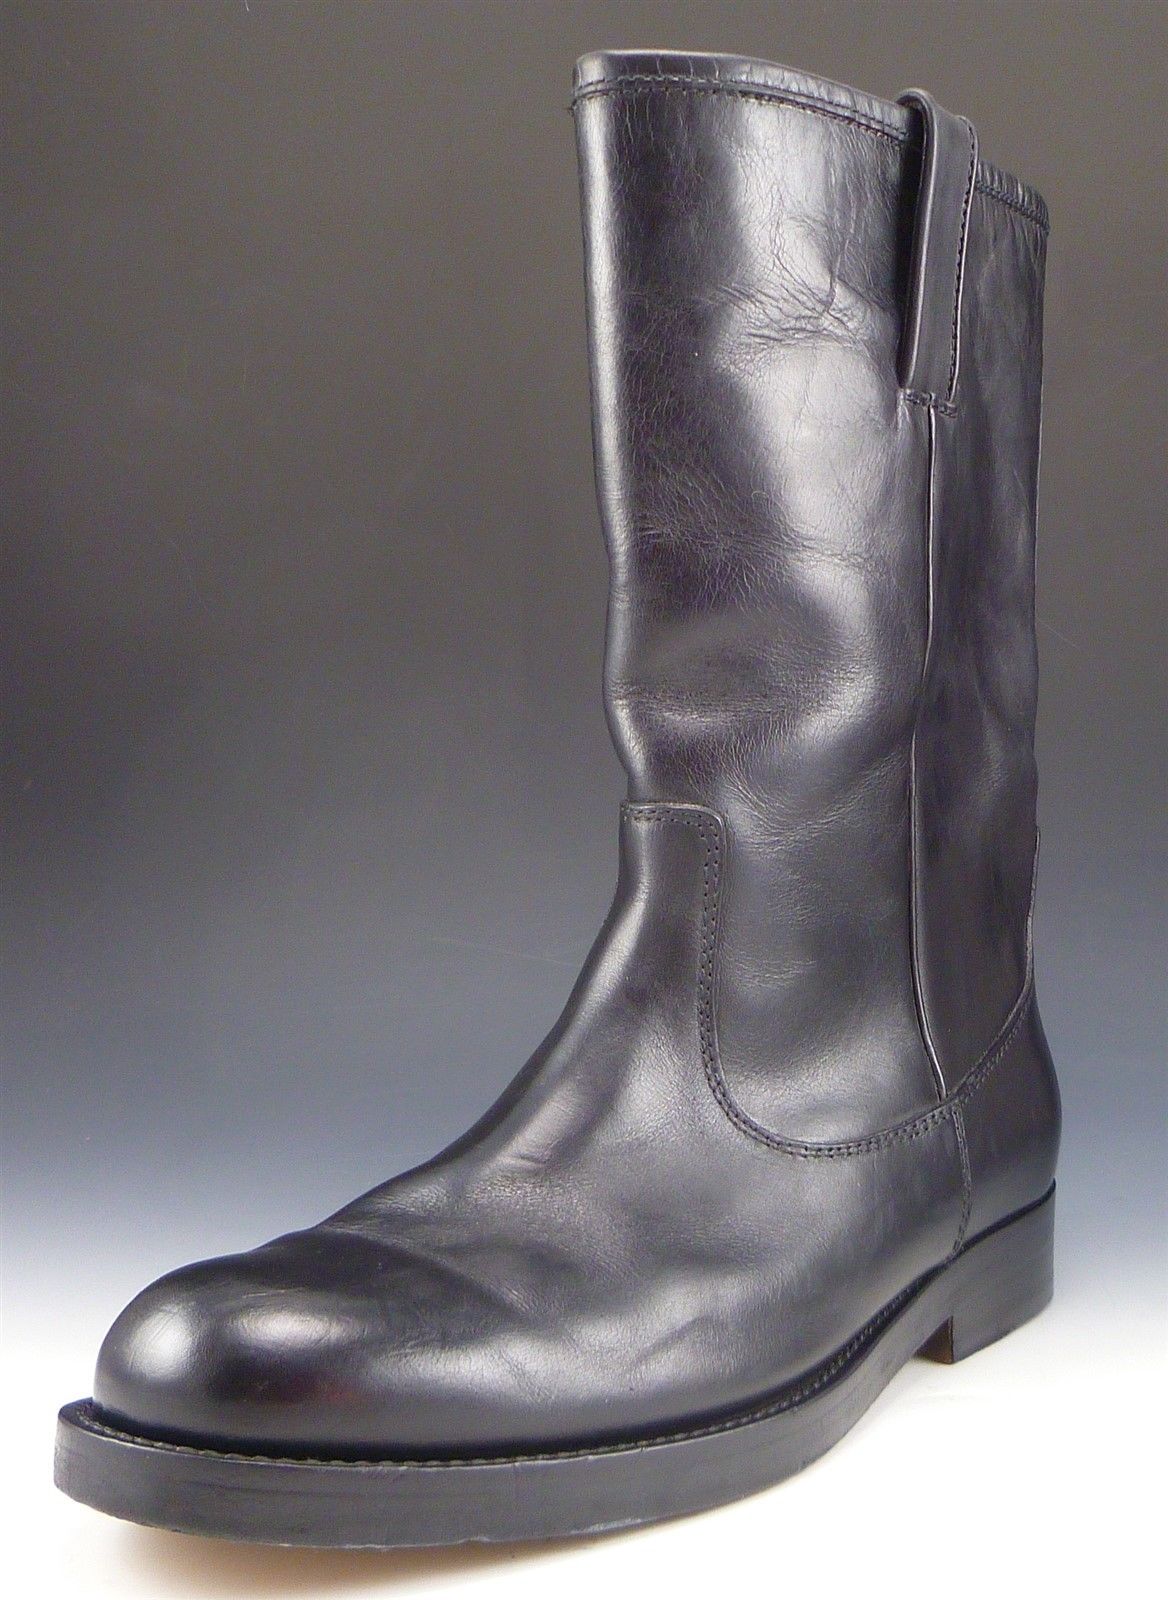 RALPH LAUREN sz 10 LEATHER PULL ON TALL BOOTS MENS BLACK fits US 10 ...